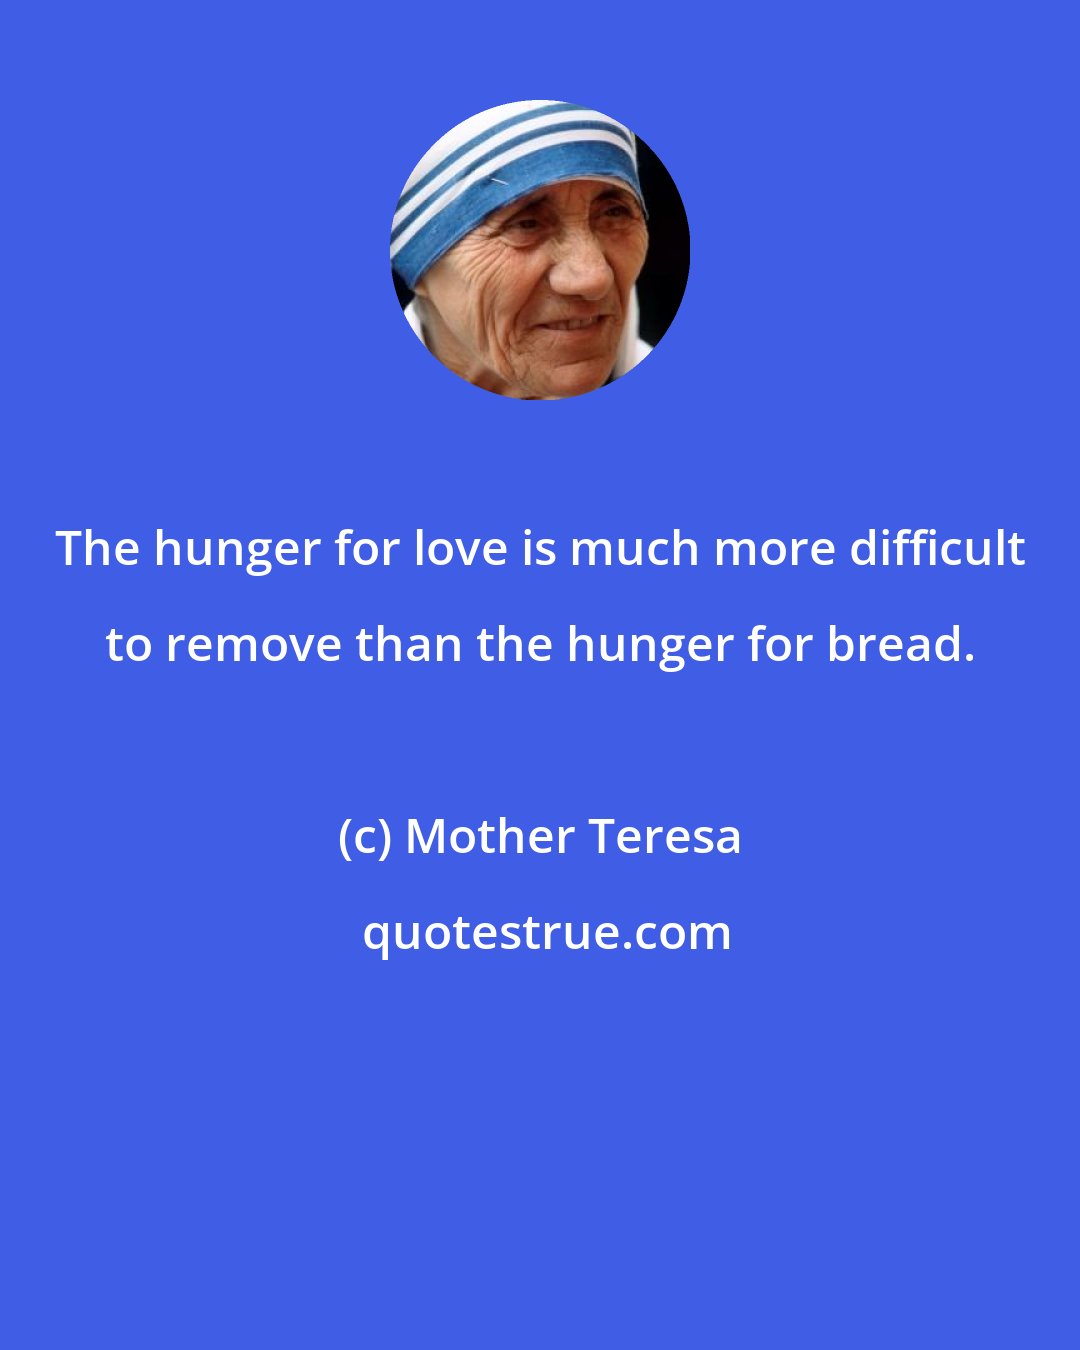 Mother Teresa: The hunger for love is much more difficult to remove than the hunger for bread.